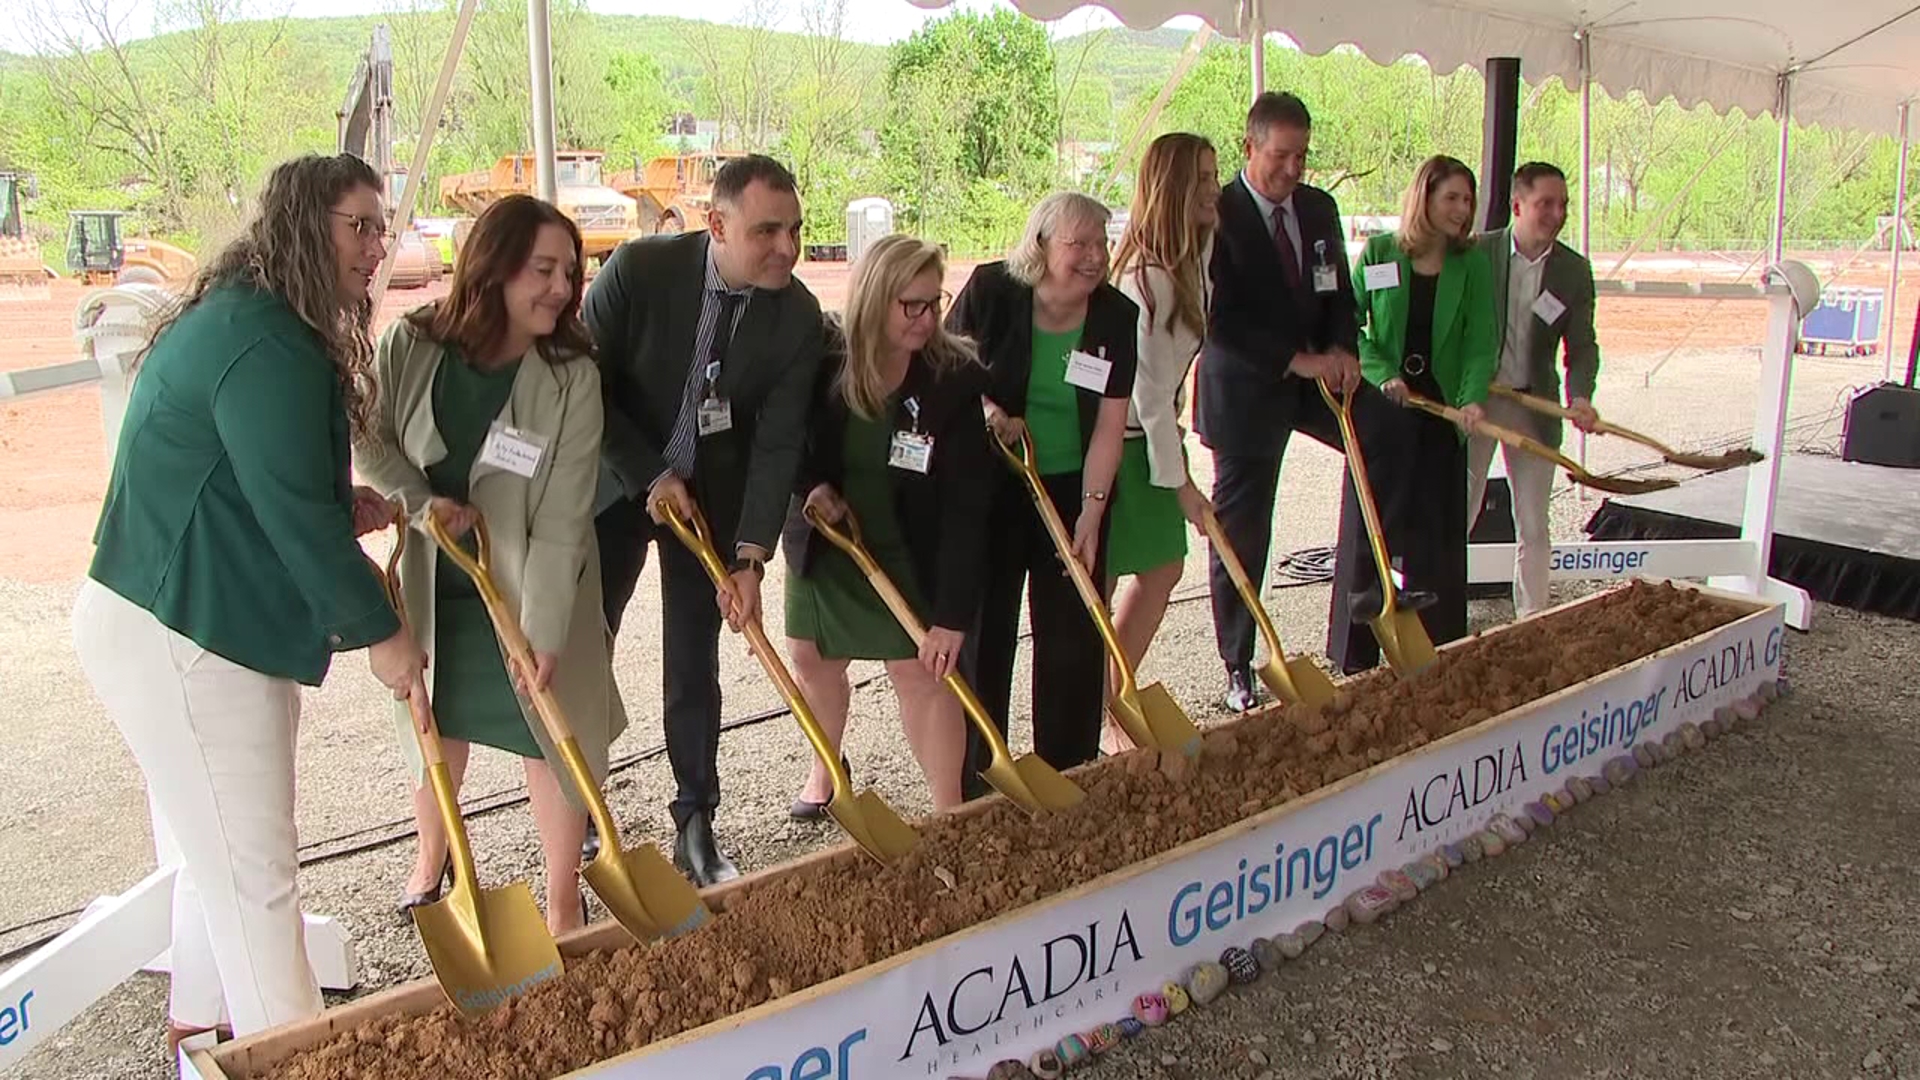 The behavioral health hospital is expected to open in the summer of 2025.